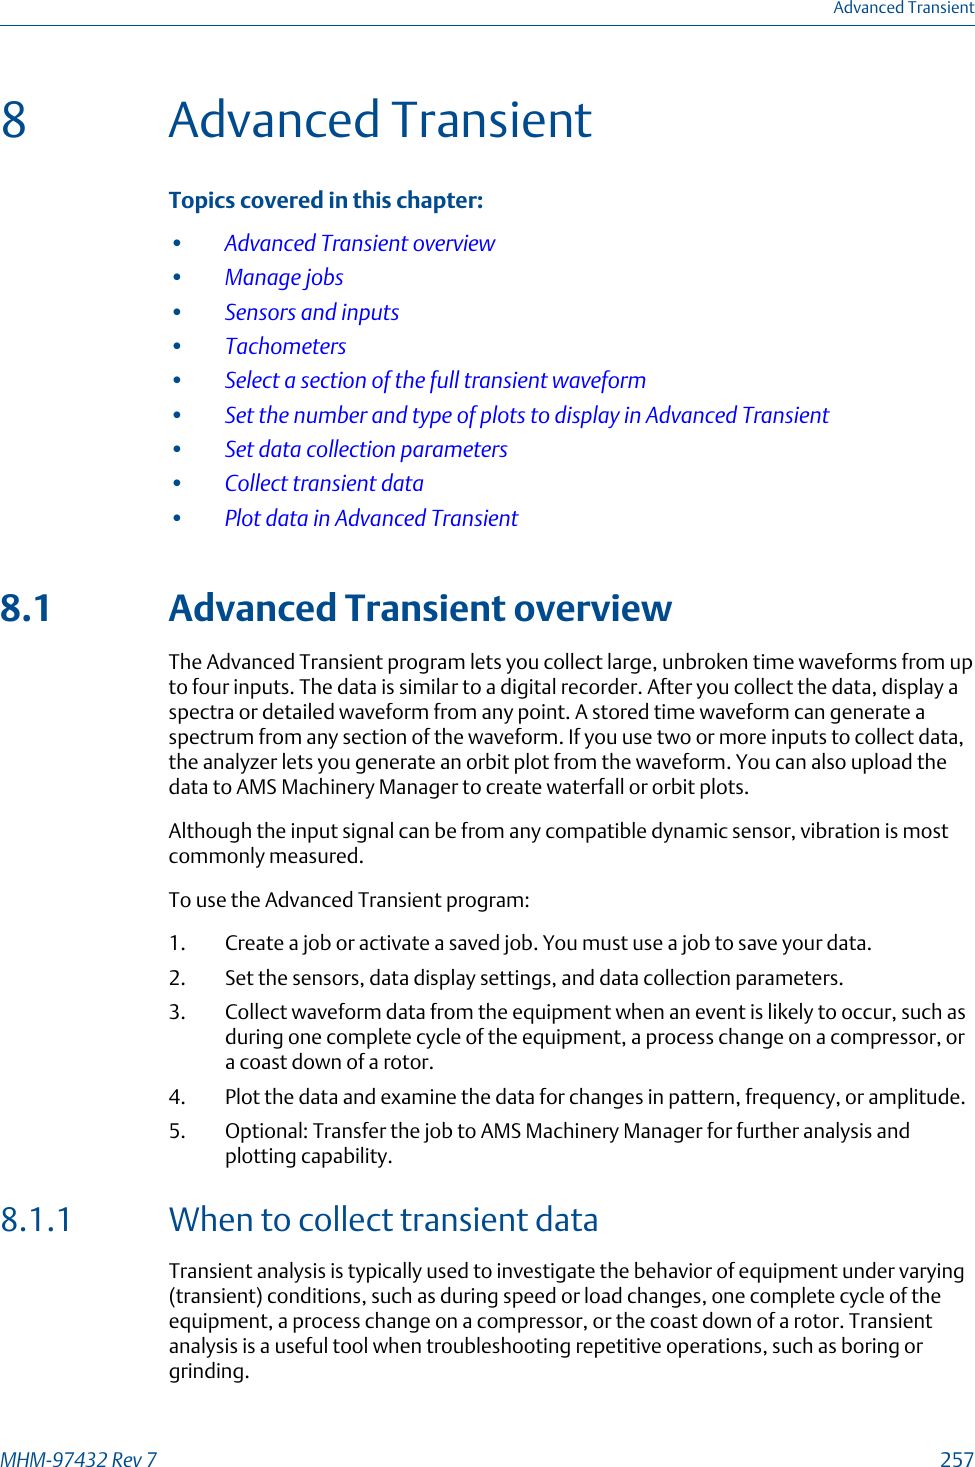 8 Advanced TransientTopics covered in this chapter:•Advanced Transient overview•Manage jobs•Sensors and inputs•Tachometers•Select a section of the full transient waveform•Set the number and type of plots to display in Advanced Transient•Set data collection parameters•Collect transient data•Plot data in Advanced Transient8.1 Advanced Transient overviewThe Advanced Transient program lets you collect large, unbroken time waveforms from upto four inputs. The data is similar to a digital recorder. After you collect the data, display aspectra or detailed waveform from any point. A stored time waveform can generate aspectrum from any section of the waveform. If you use two or more inputs to collect data,the analyzer lets you generate an orbit plot from the waveform. You can also upload thedata to AMS Machinery Manager to create waterfall or orbit plots.Although the input signal can be from any compatible dynamic sensor, vibration is mostcommonly measured.To use the Advanced Transient program:1. Create a job or activate a saved job. You must use a job to save your data.2. Set the sensors, data display settings, and data collection parameters.3. Collect waveform data from the equipment when an event is likely to occur, such asduring one complete cycle of the equipment, a process change on a compressor, ora coast down of a rotor.4. Plot the data and examine the data for changes in pattern, frequency, or amplitude.5. Optional: Transfer the job to AMS Machinery Manager for further analysis andplotting capability.8.1.1 When to collect transient dataTransient analysis is typically used to investigate the behavior of equipment under varying(transient) conditions, such as during speed or load changes, one complete cycle of theequipment, a process change on a compressor, or the coast down of a rotor. Transientanalysis is a useful tool when troubleshooting repetitive operations, such as boring orgrinding.Advanced TransientMHM-97432 Rev 7  257